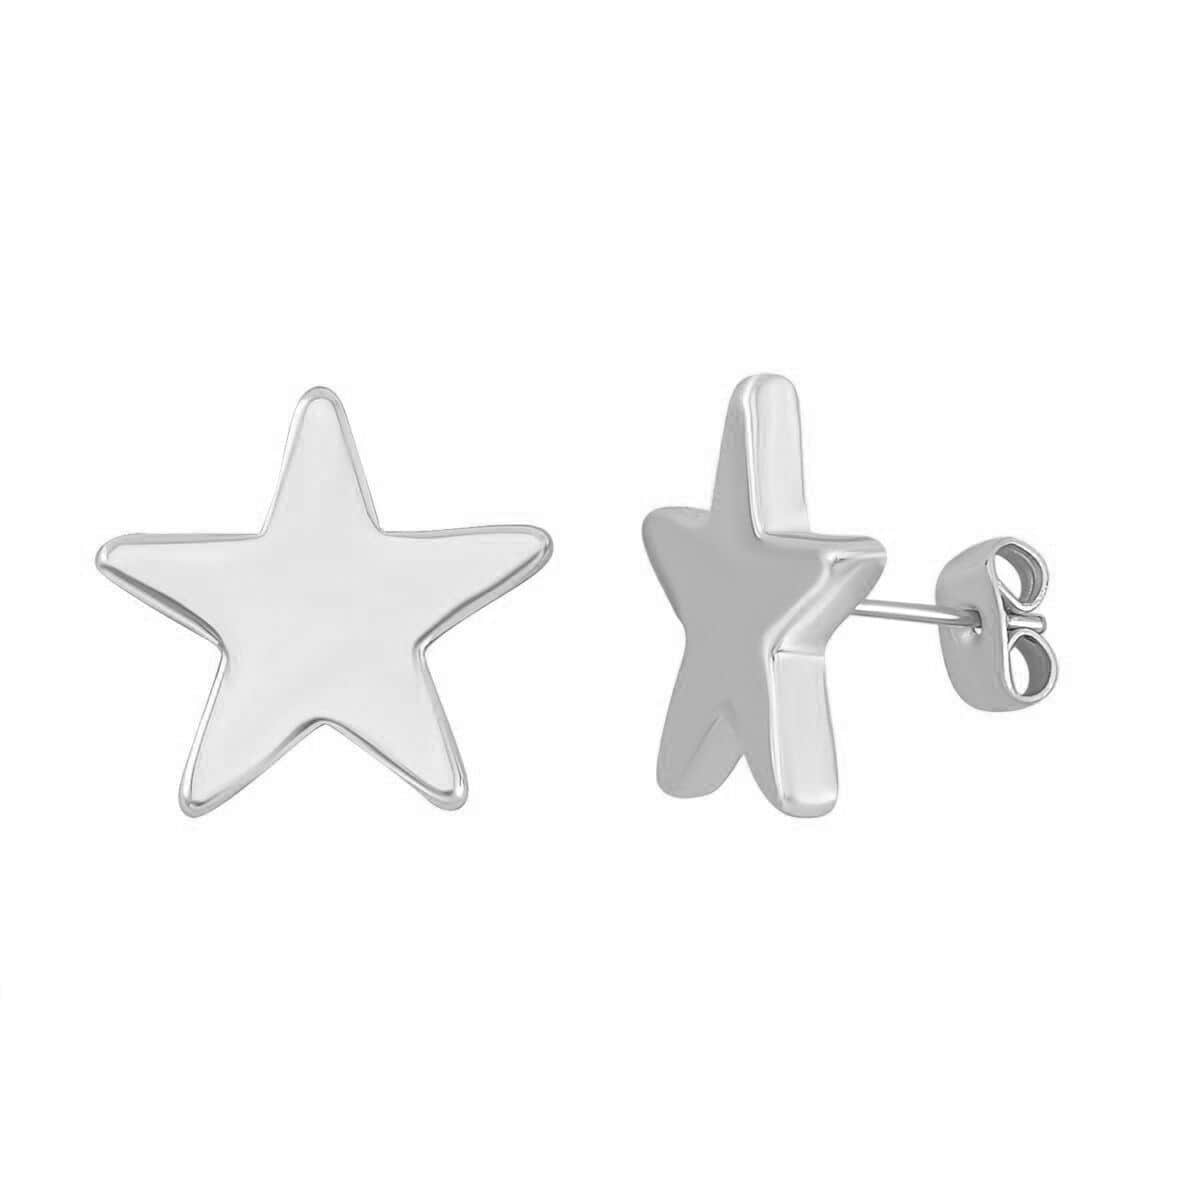 Set of Star Necklace 18-22 Inches and Earrings in Silvertone image number 6